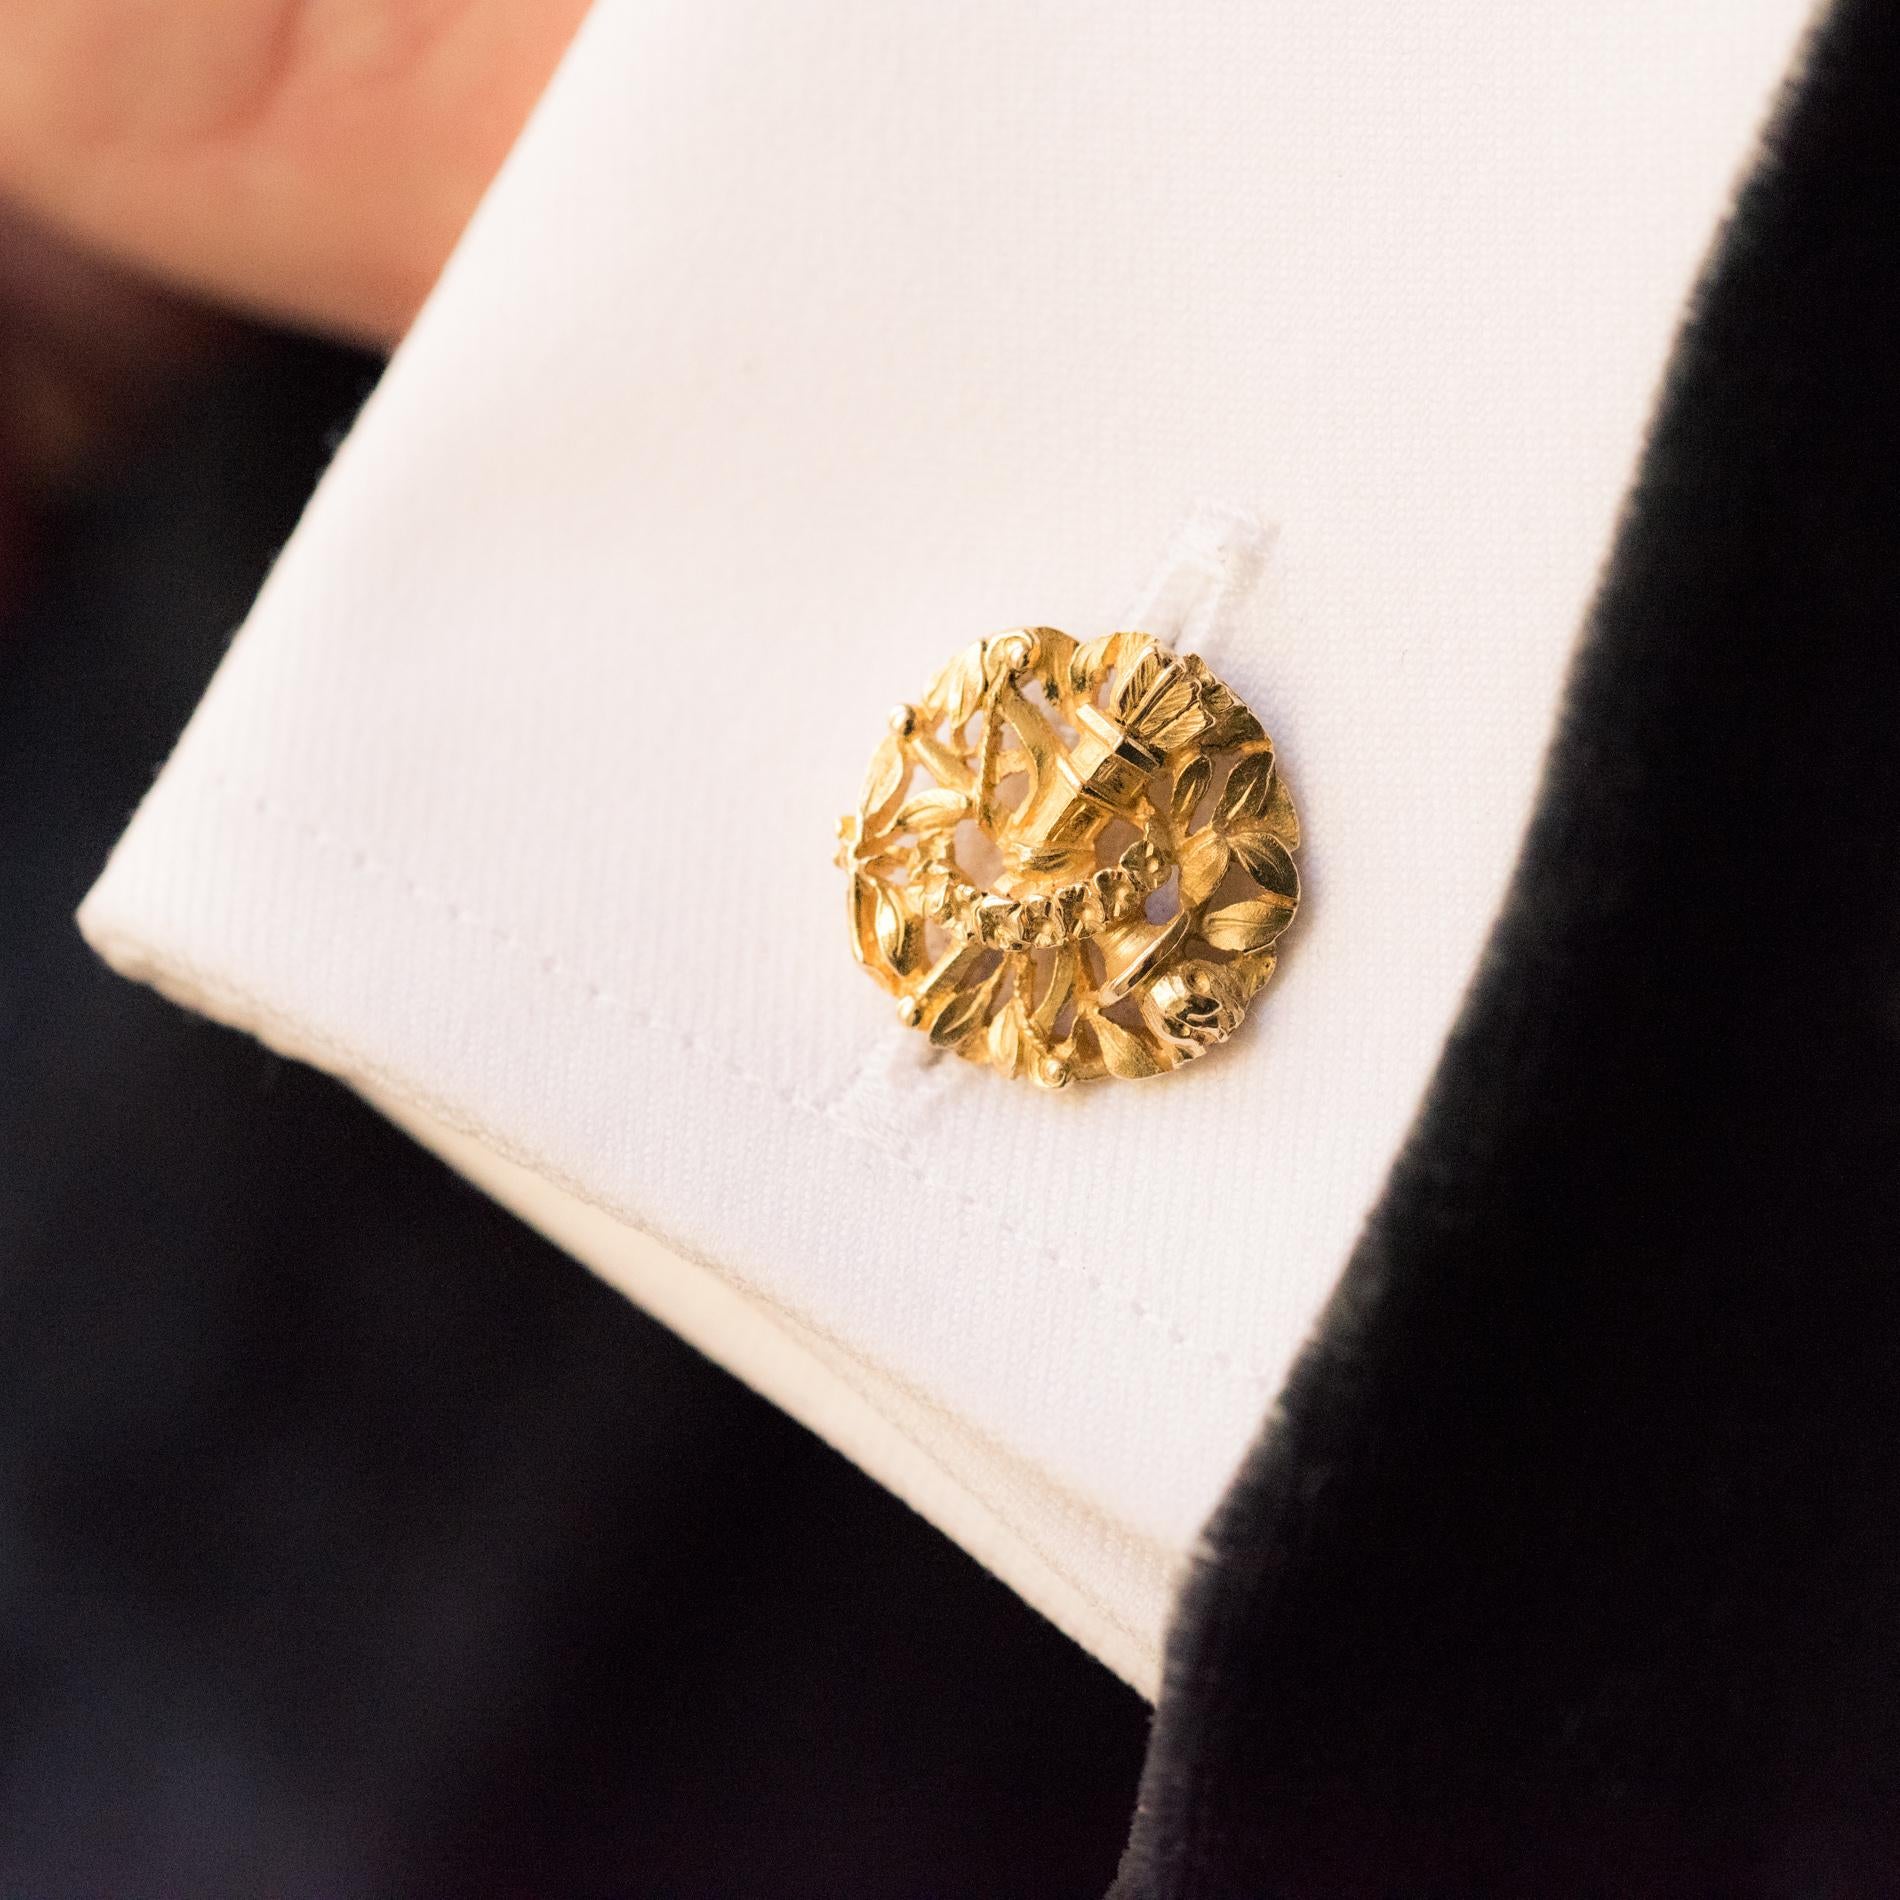 Pair of cufflinks in 18 karat yellow gold, eagle's head hallmark.
These cufflinks are round, perforated with a quiver and a hymenic torch on an openwork decoration of foliage and retained by a crown of roses. The central part is a curved rod with a